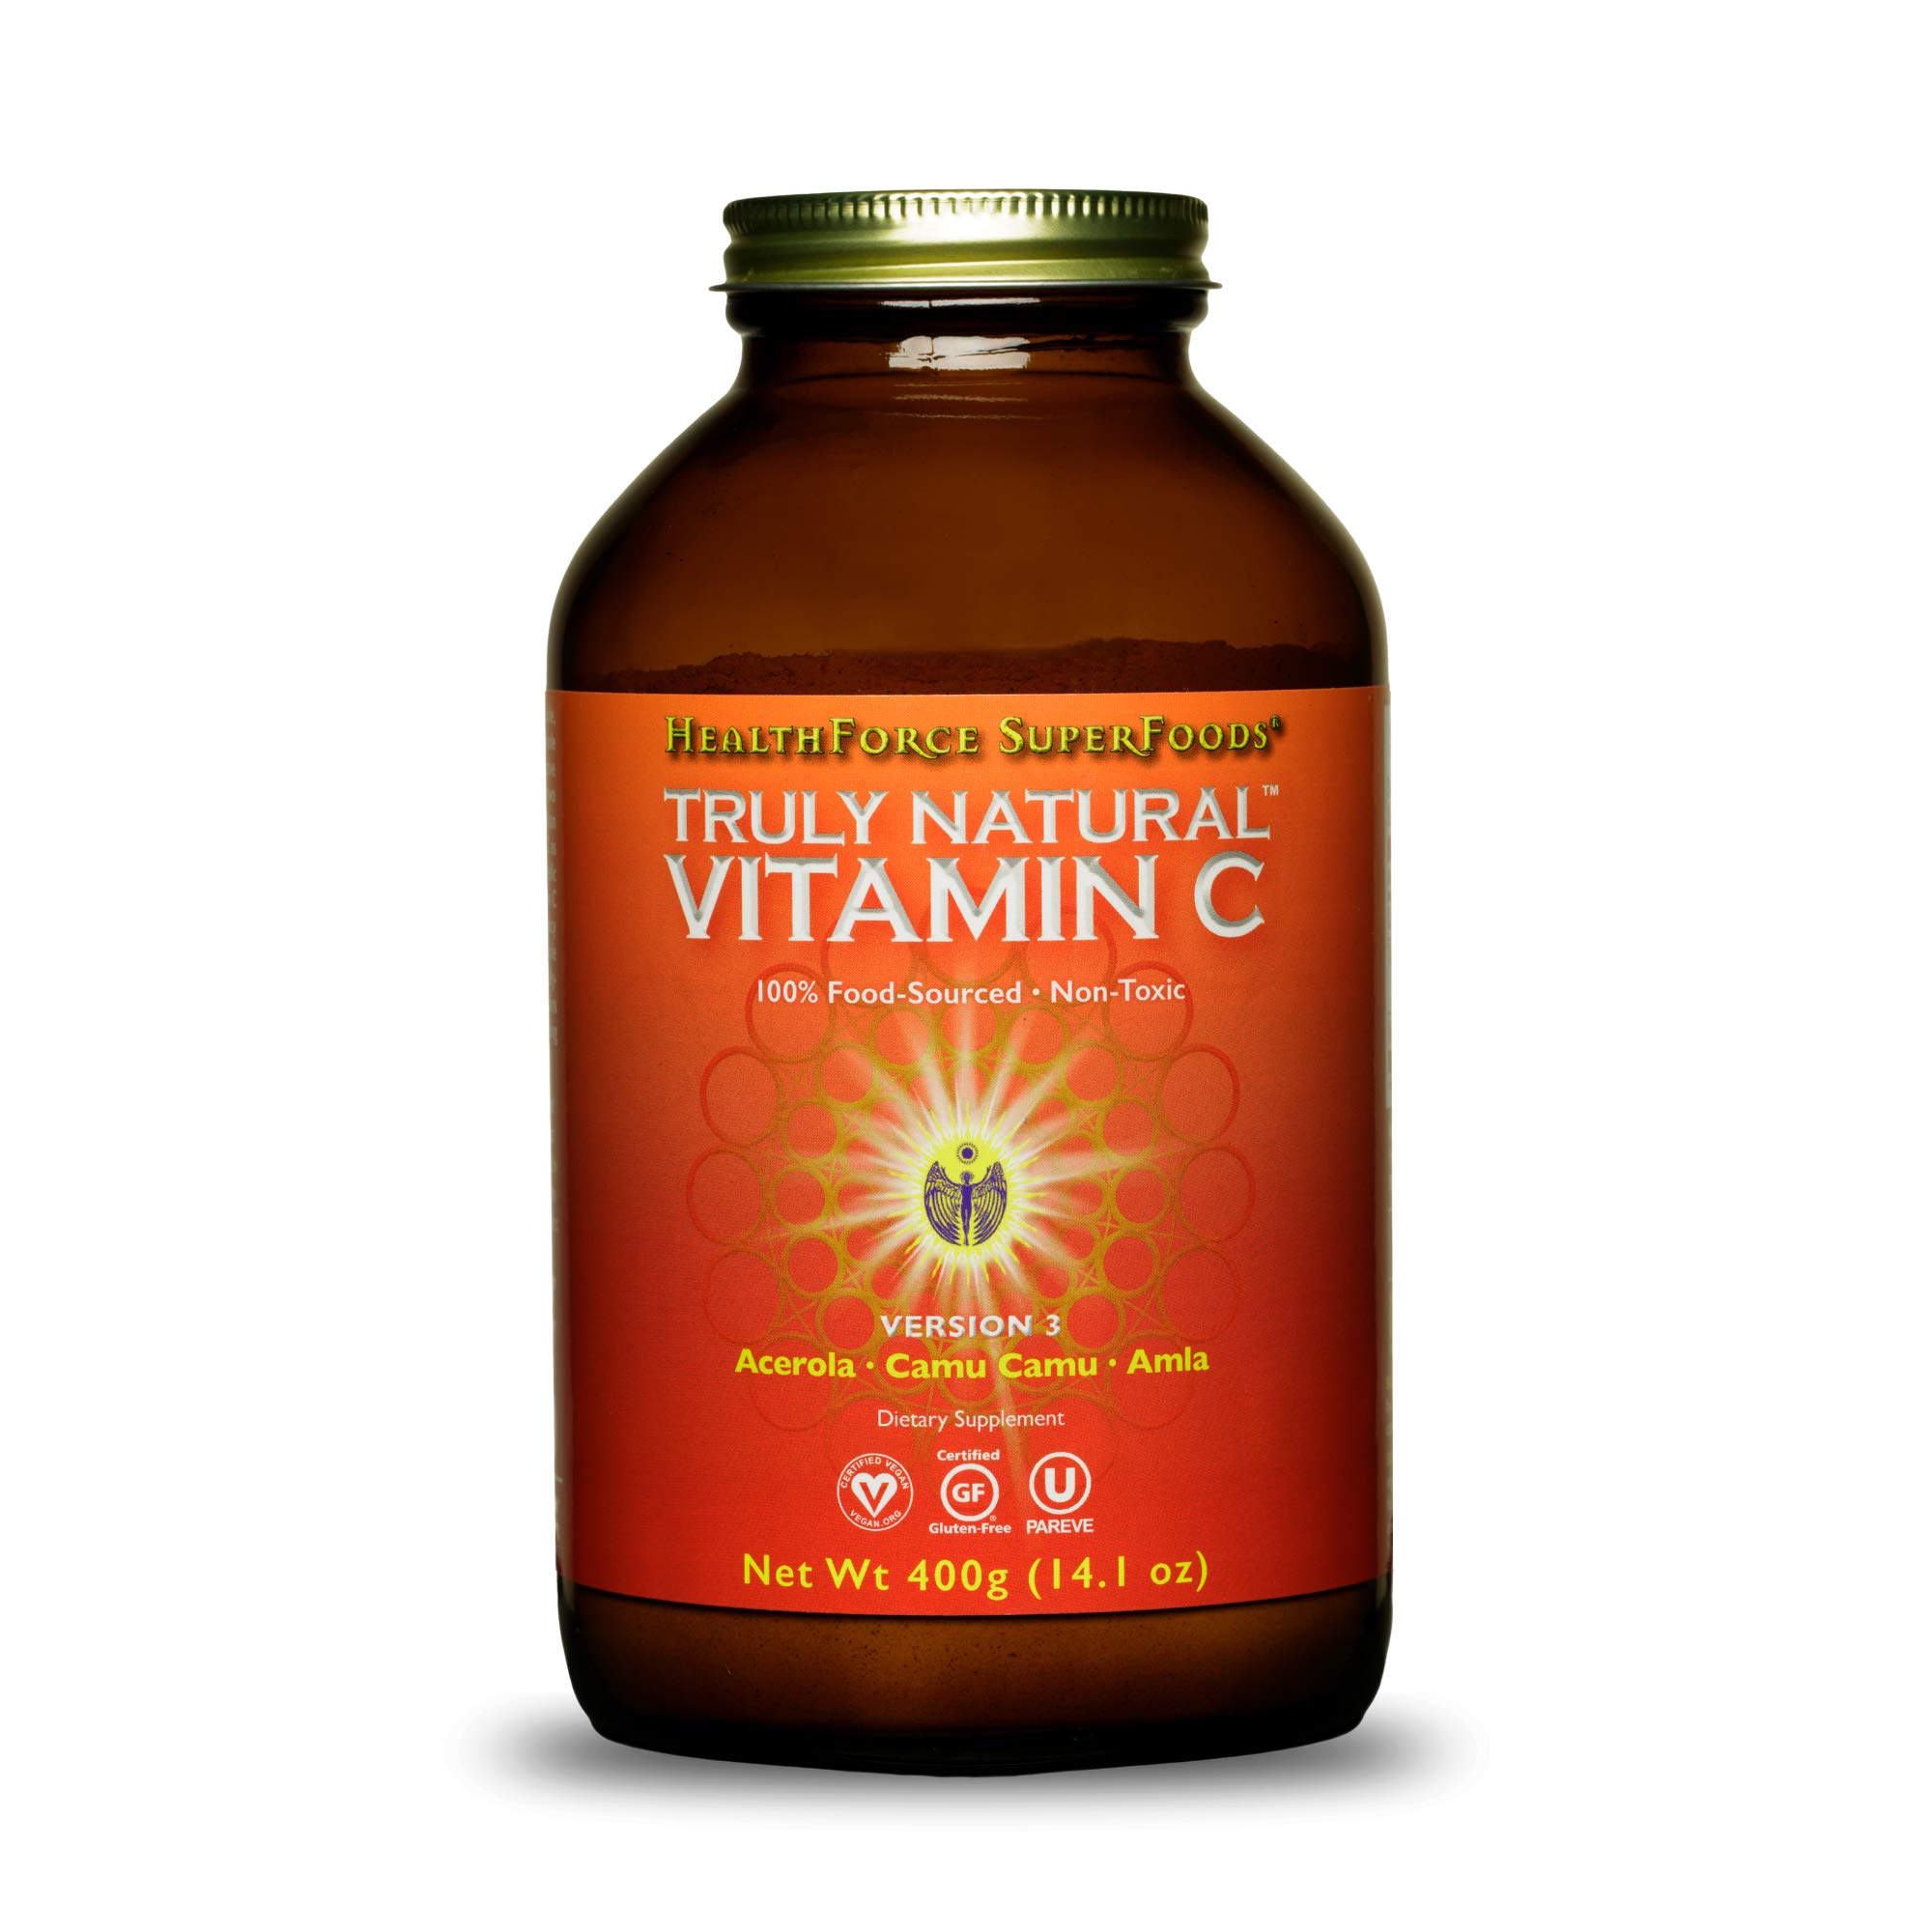 HealthForce SuperFoods Truly Natural Vitamin C - 400 Grams - Whole Food Vitamin C Complex from Acerola Cherry Powder - Immune Support - Vegan, Glut...